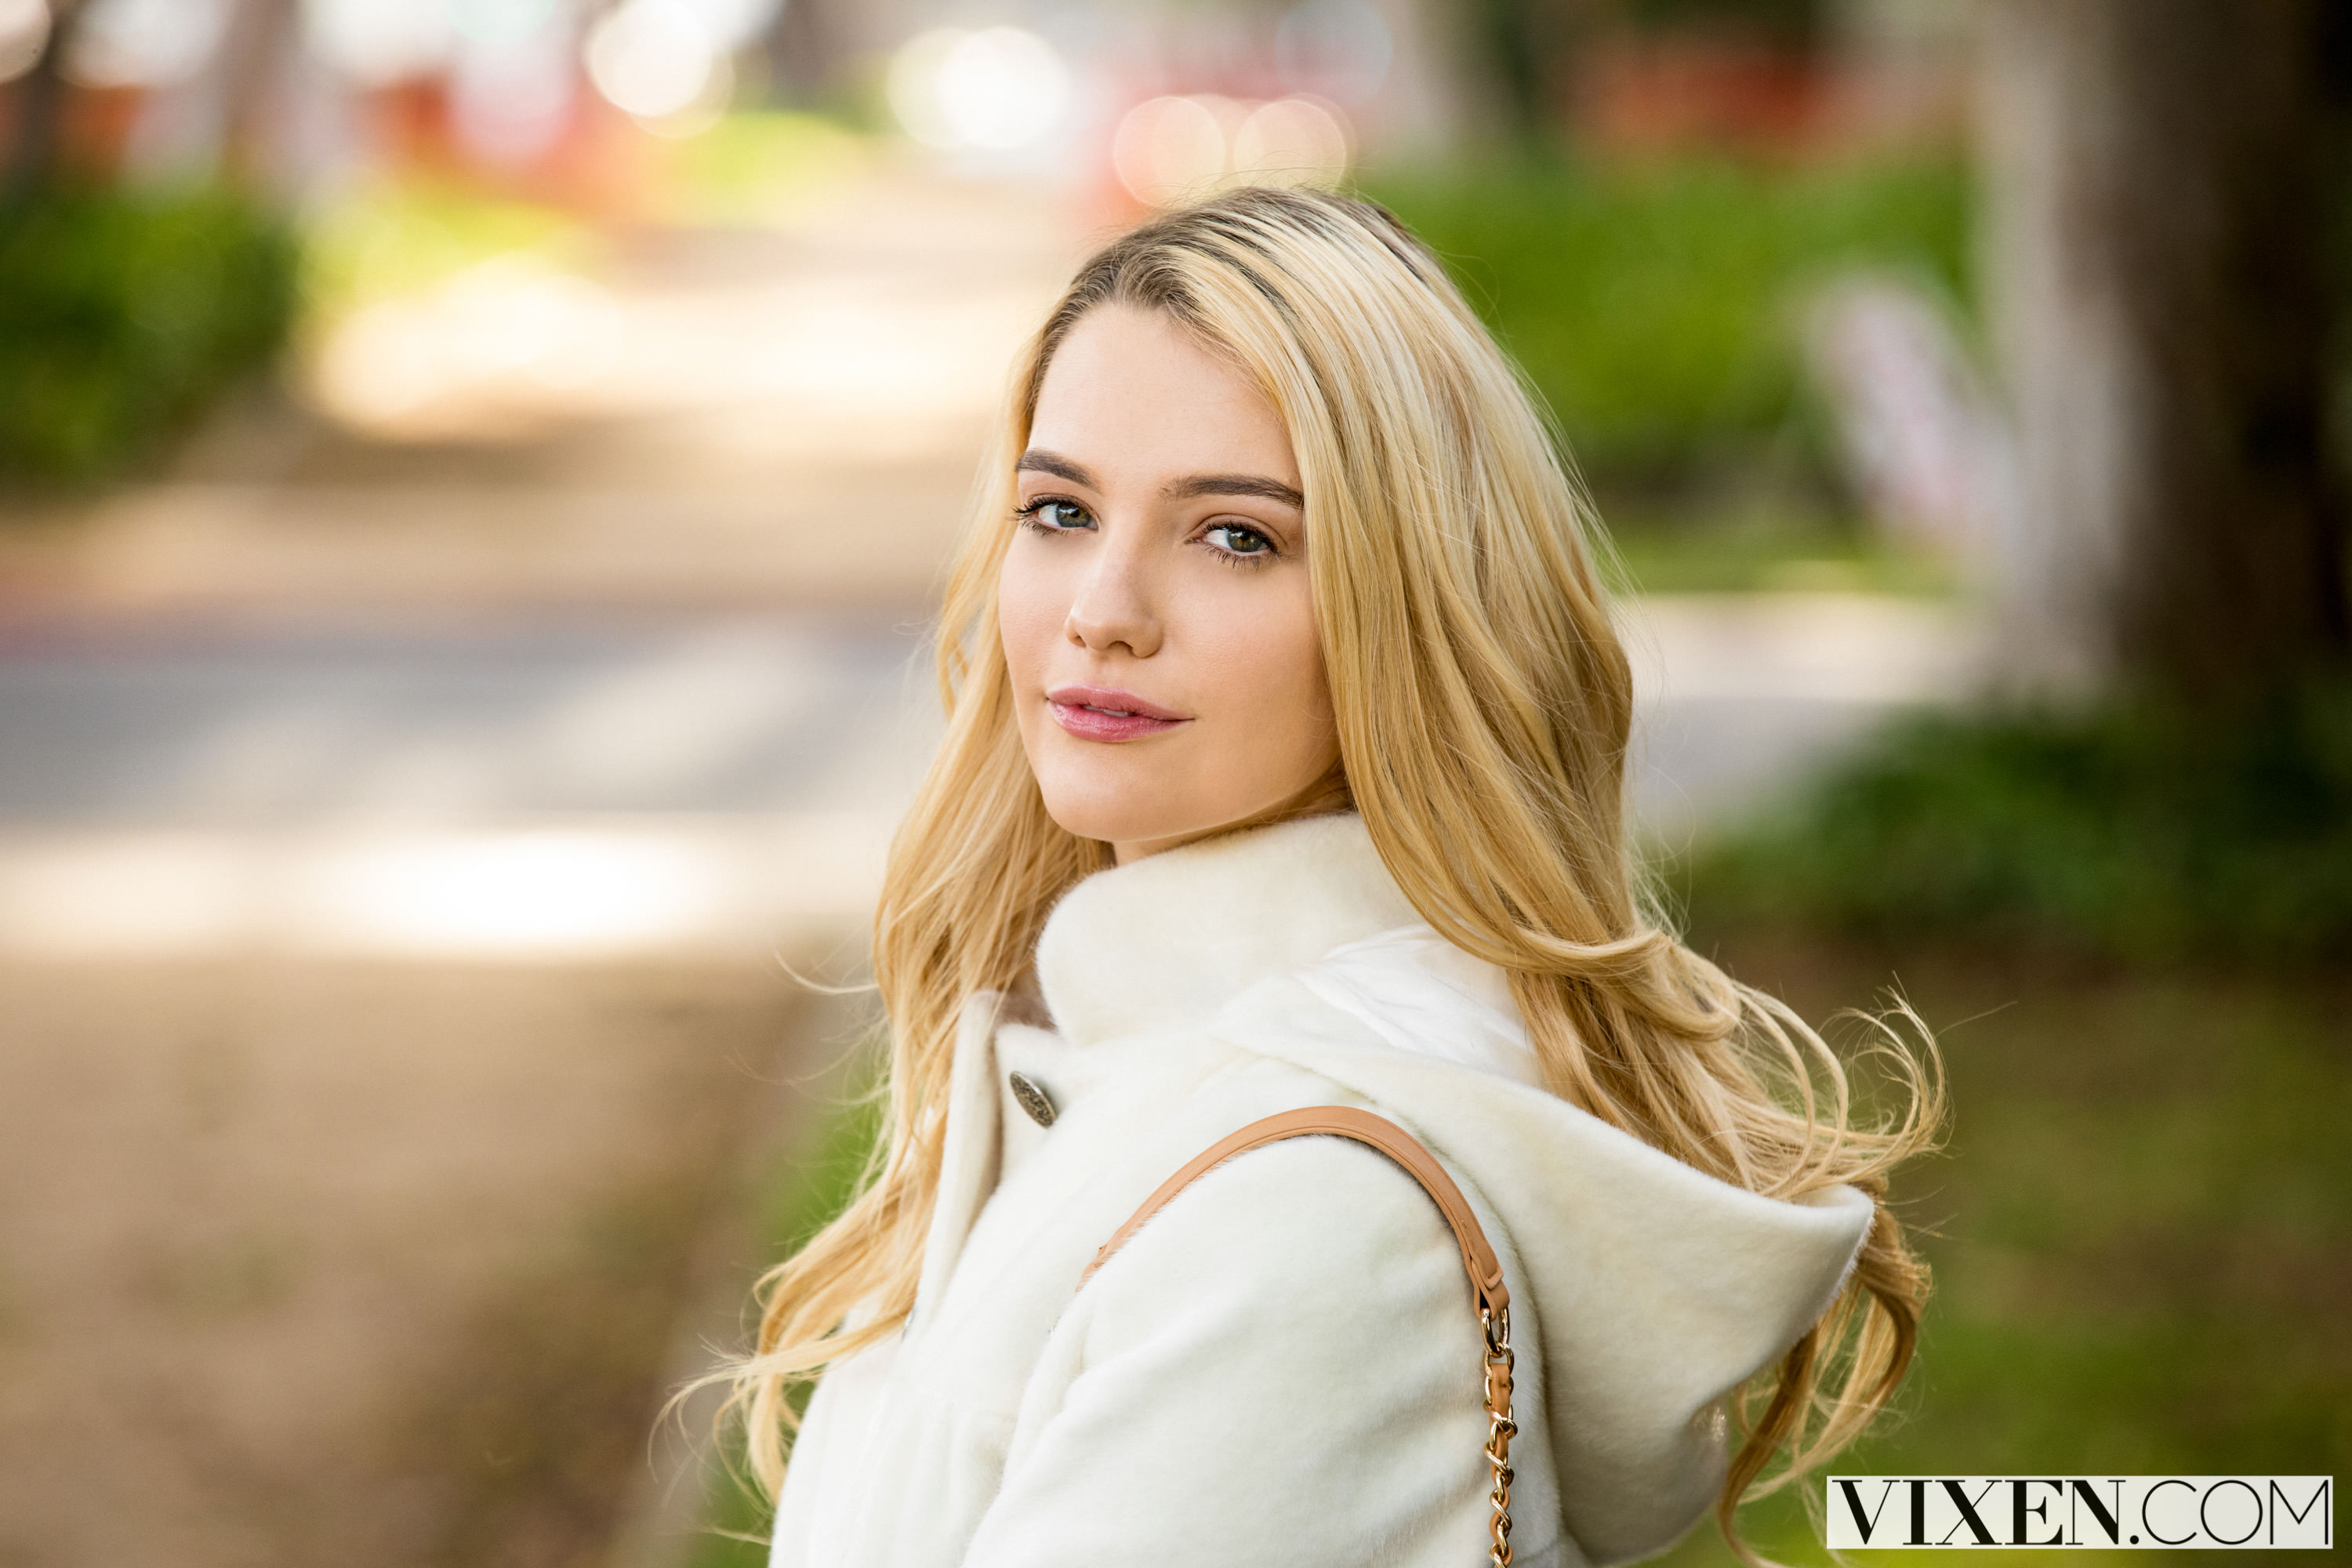 People 3000x2000 women looking at viewer face coats blonde long hair smiling white coat Vixen pornstar Kenna James blurred blurry background parted lips model outdoors women outdoors watermarked pink lipstick looking over shoulder straps overcoats